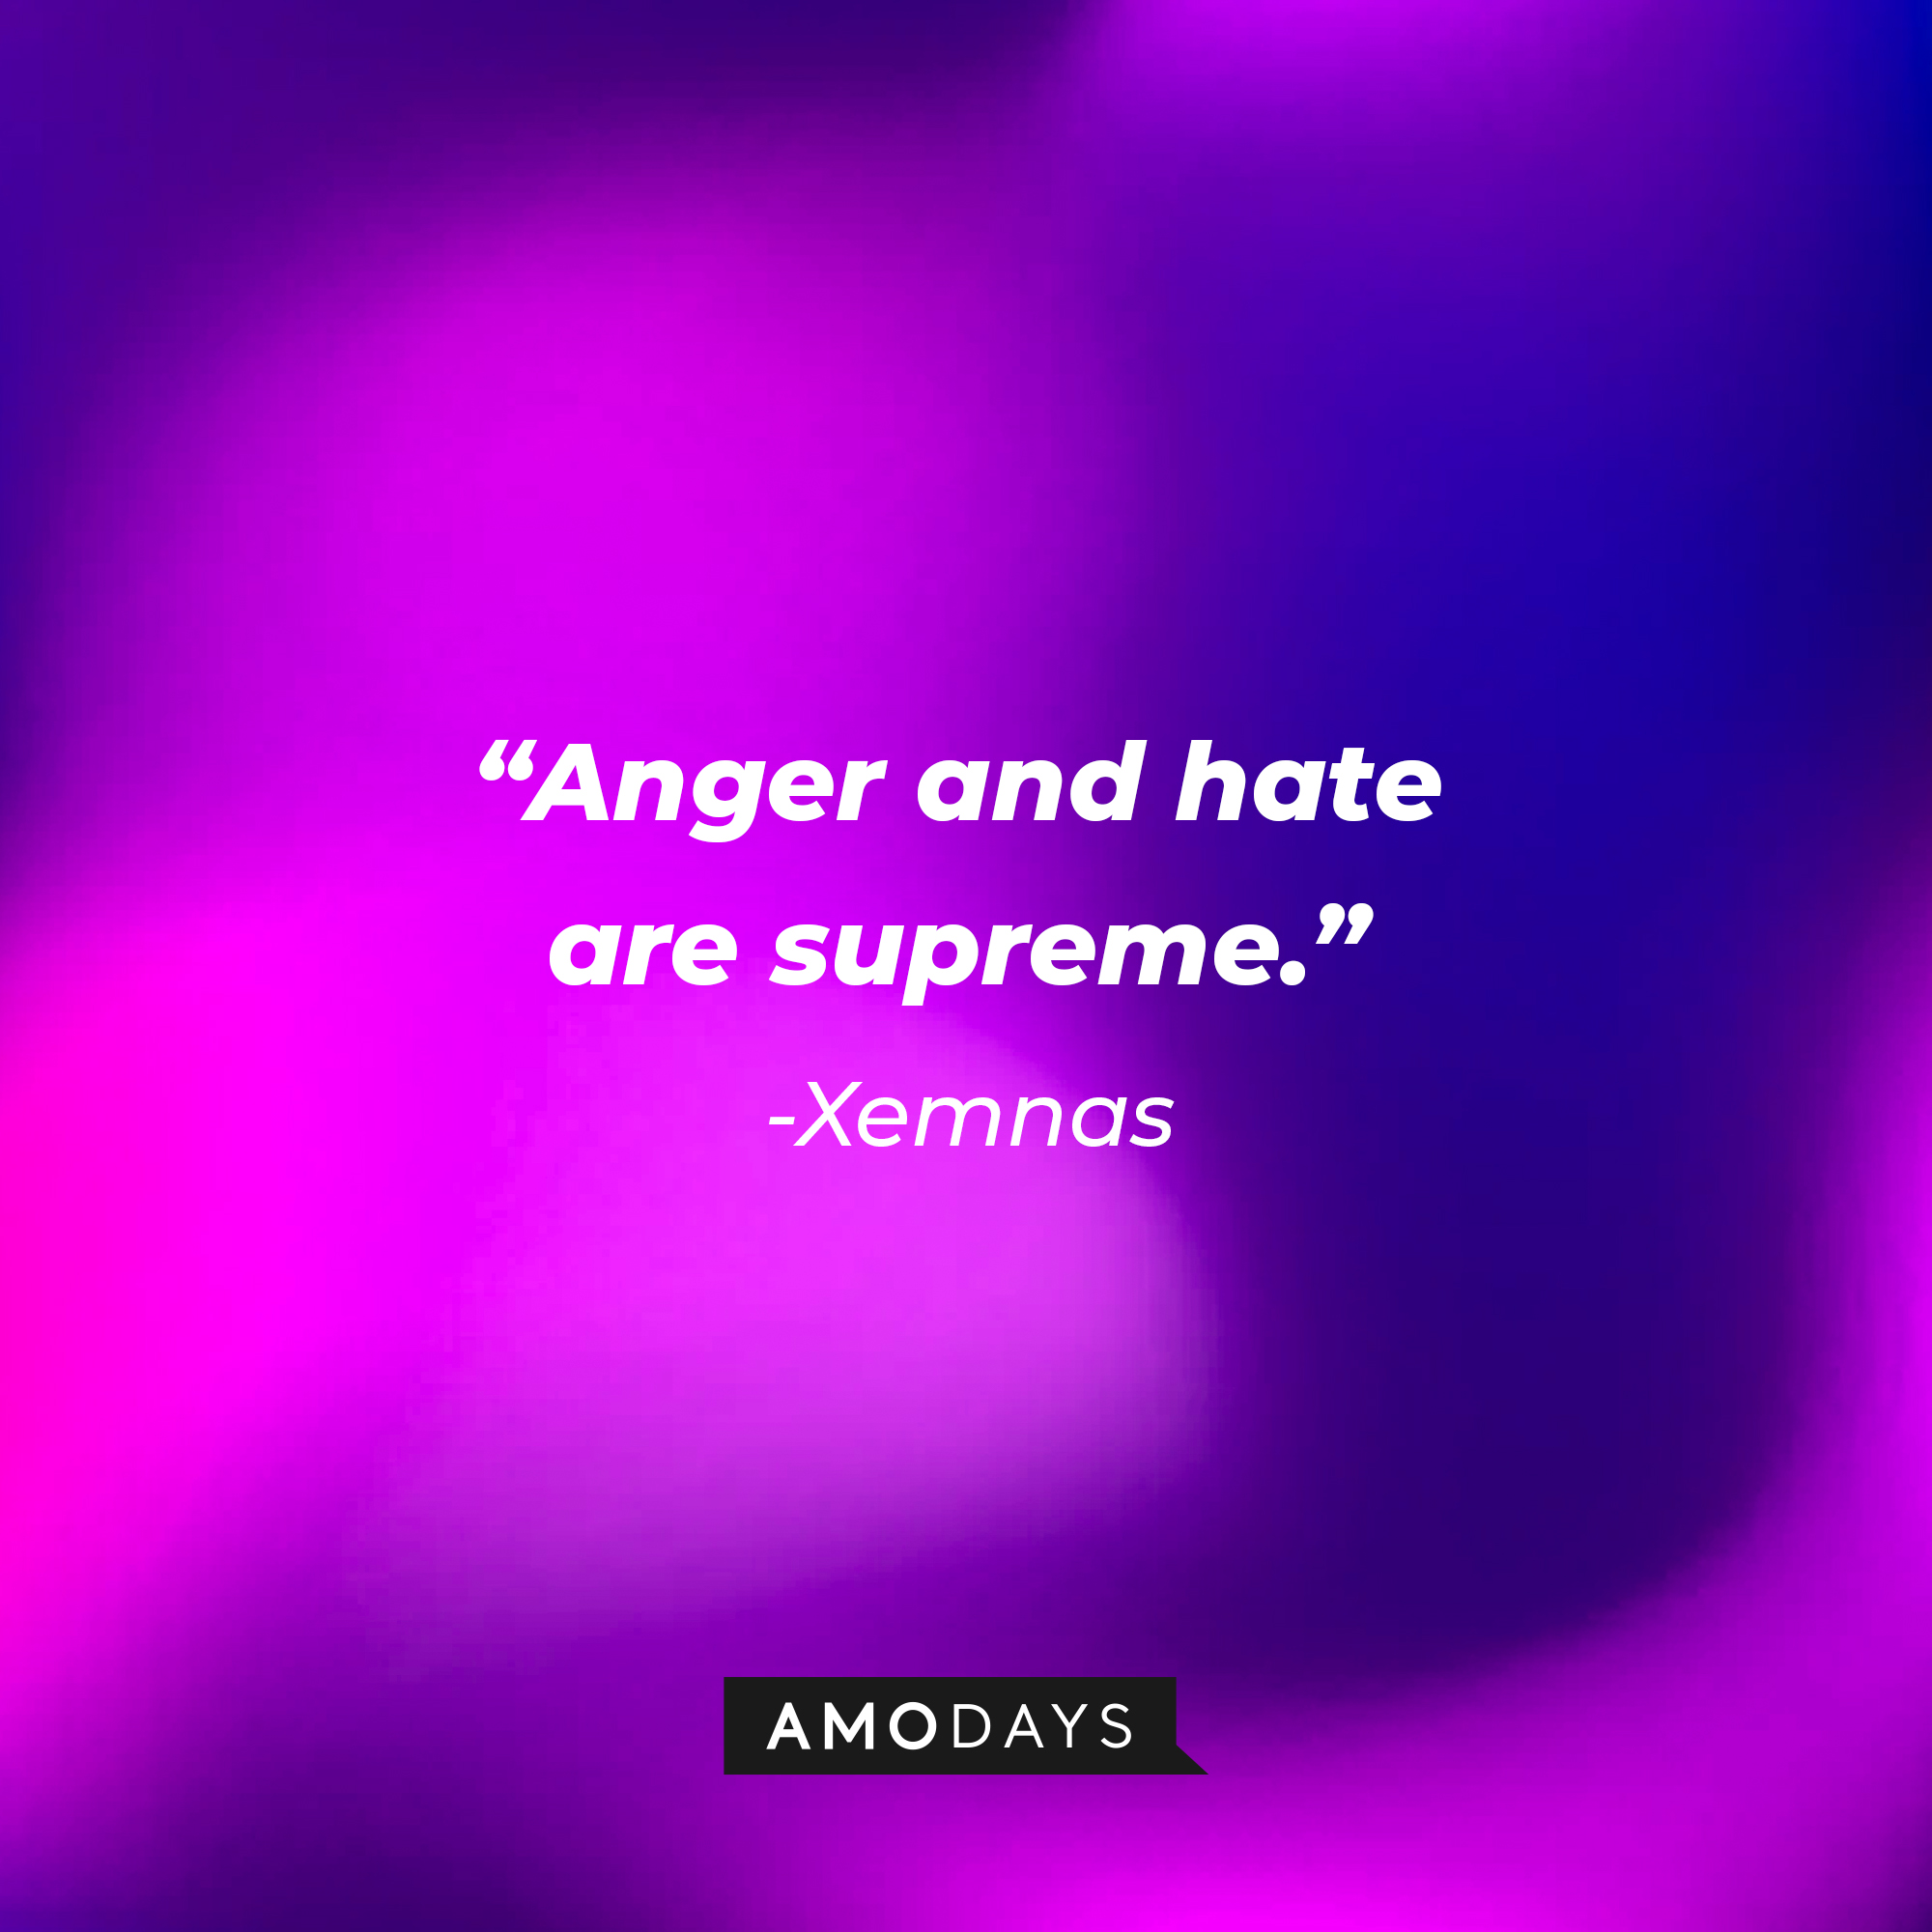 Xenmas’ quote: “Anger and hate are supreme.” | Source: AmoDays